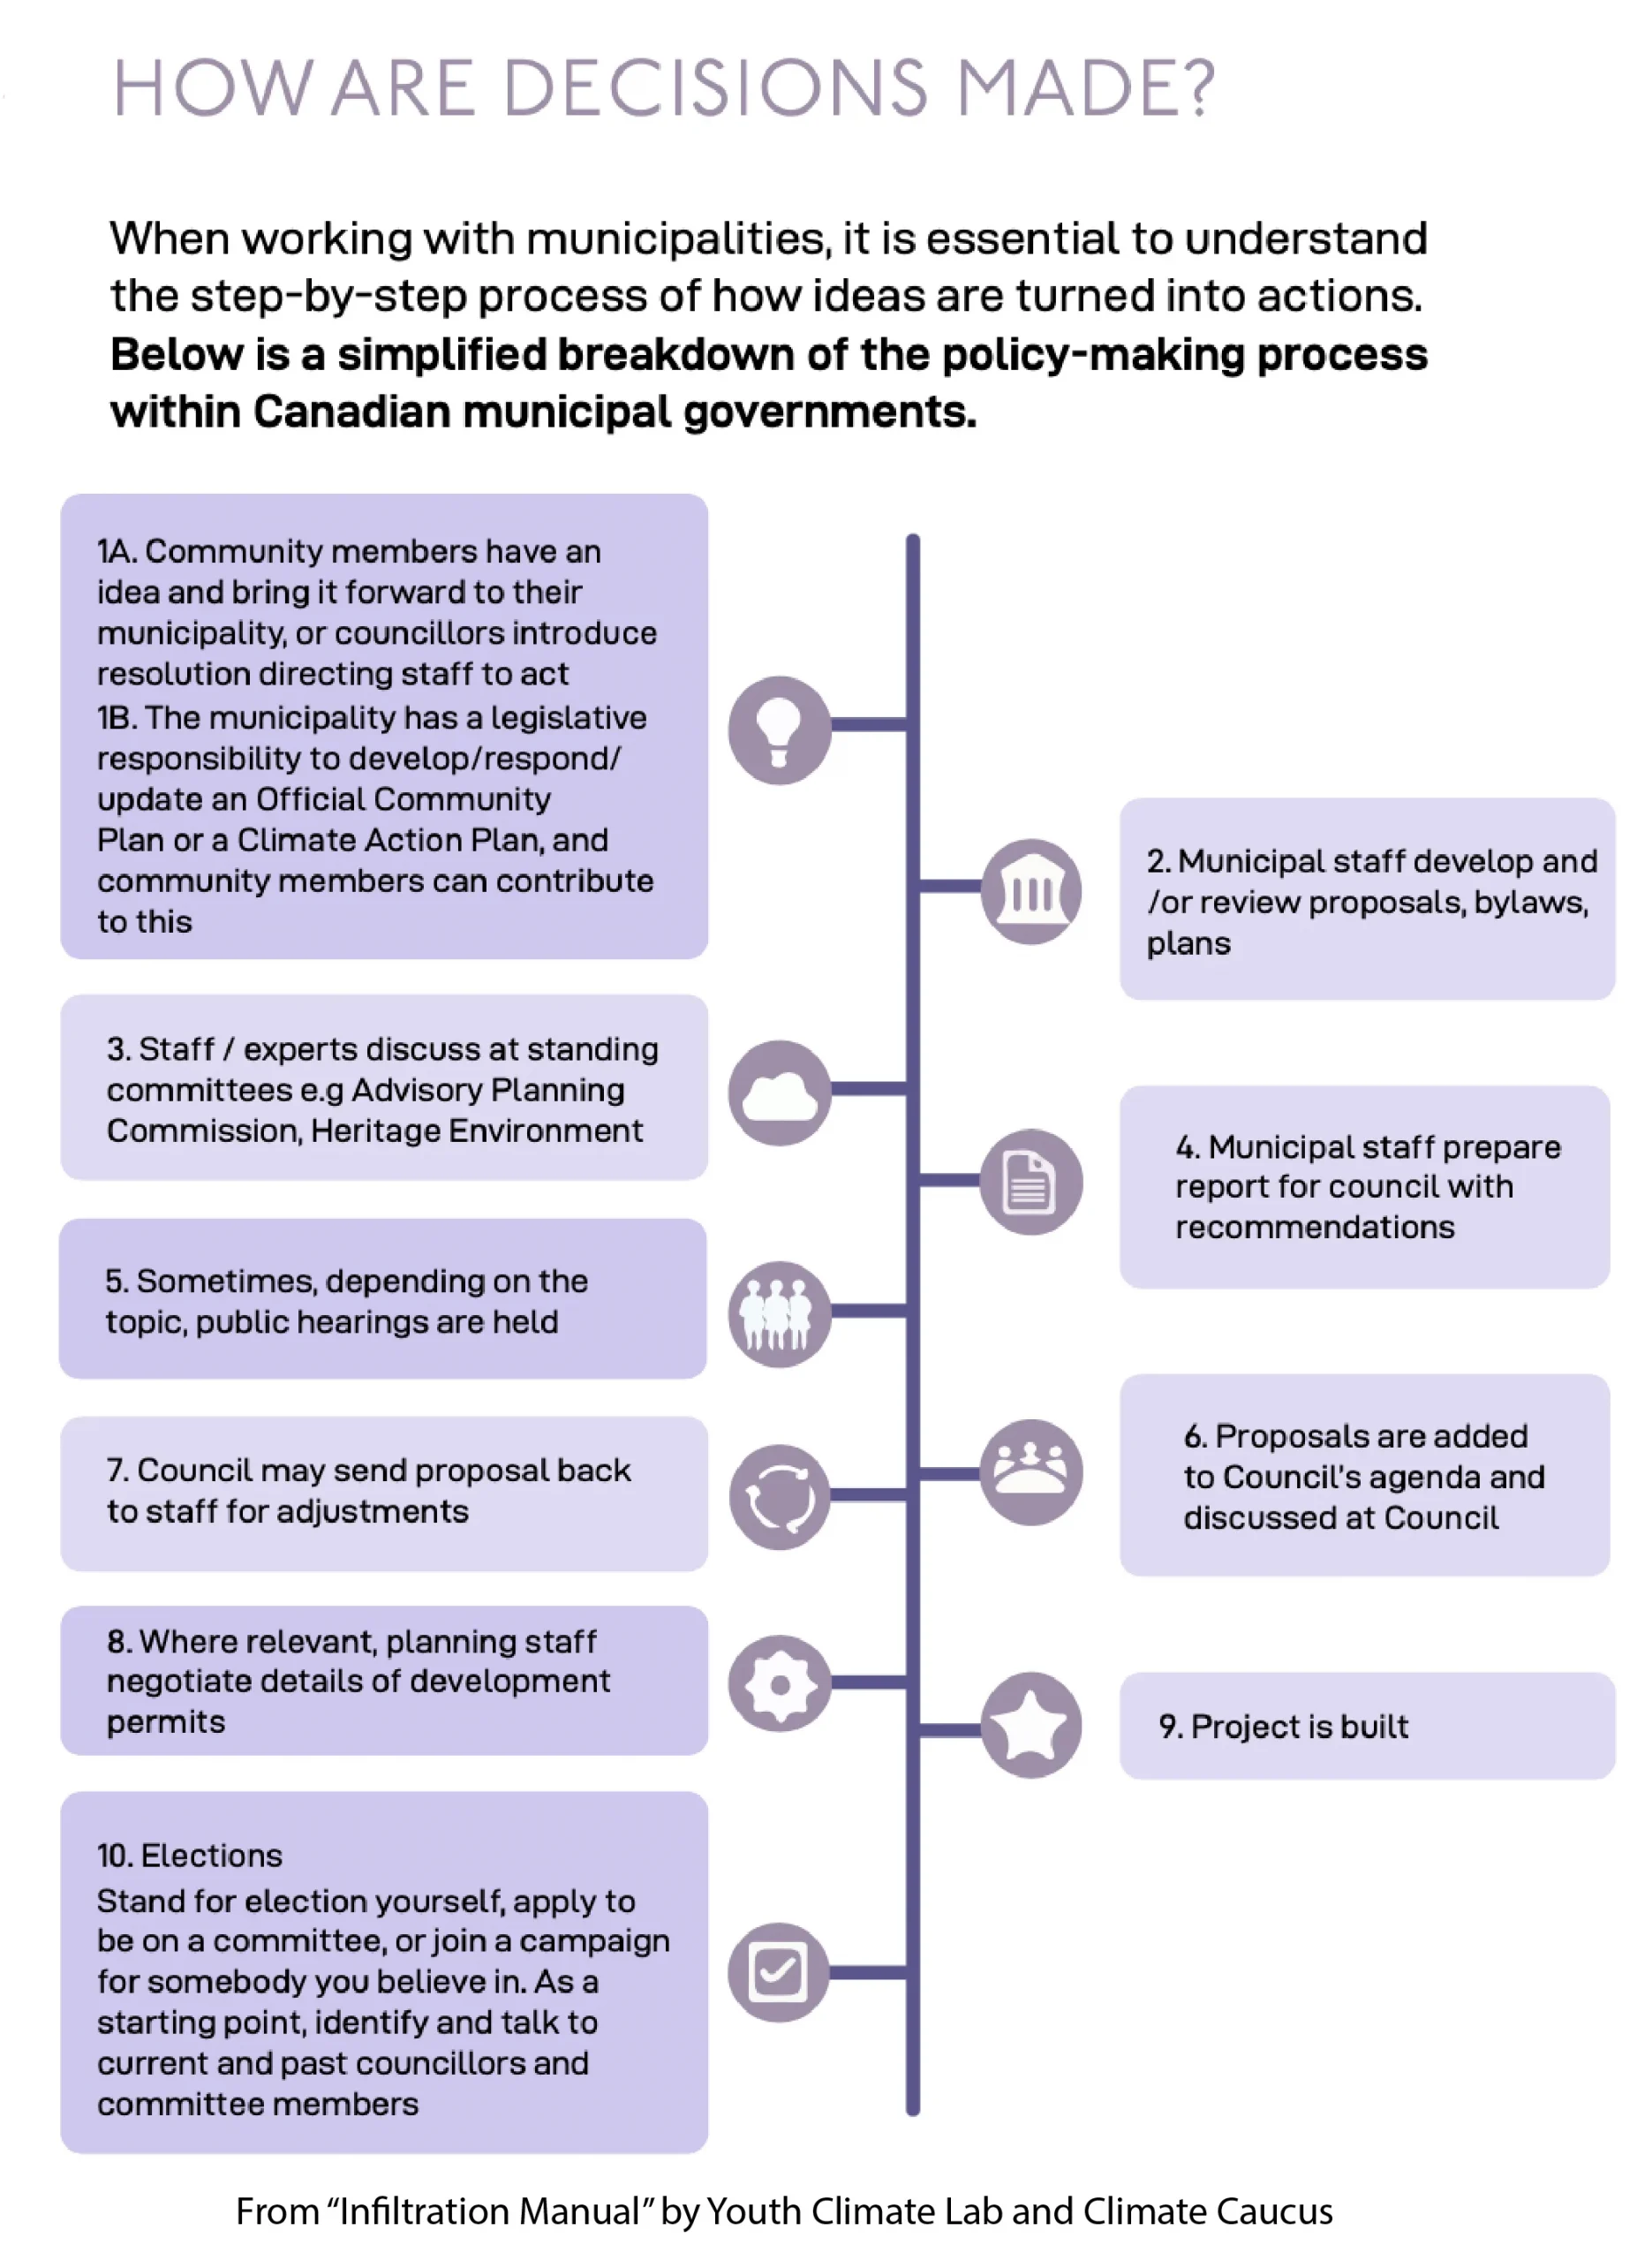 A diagram showing the policy-making process within Canadian municipal governments.